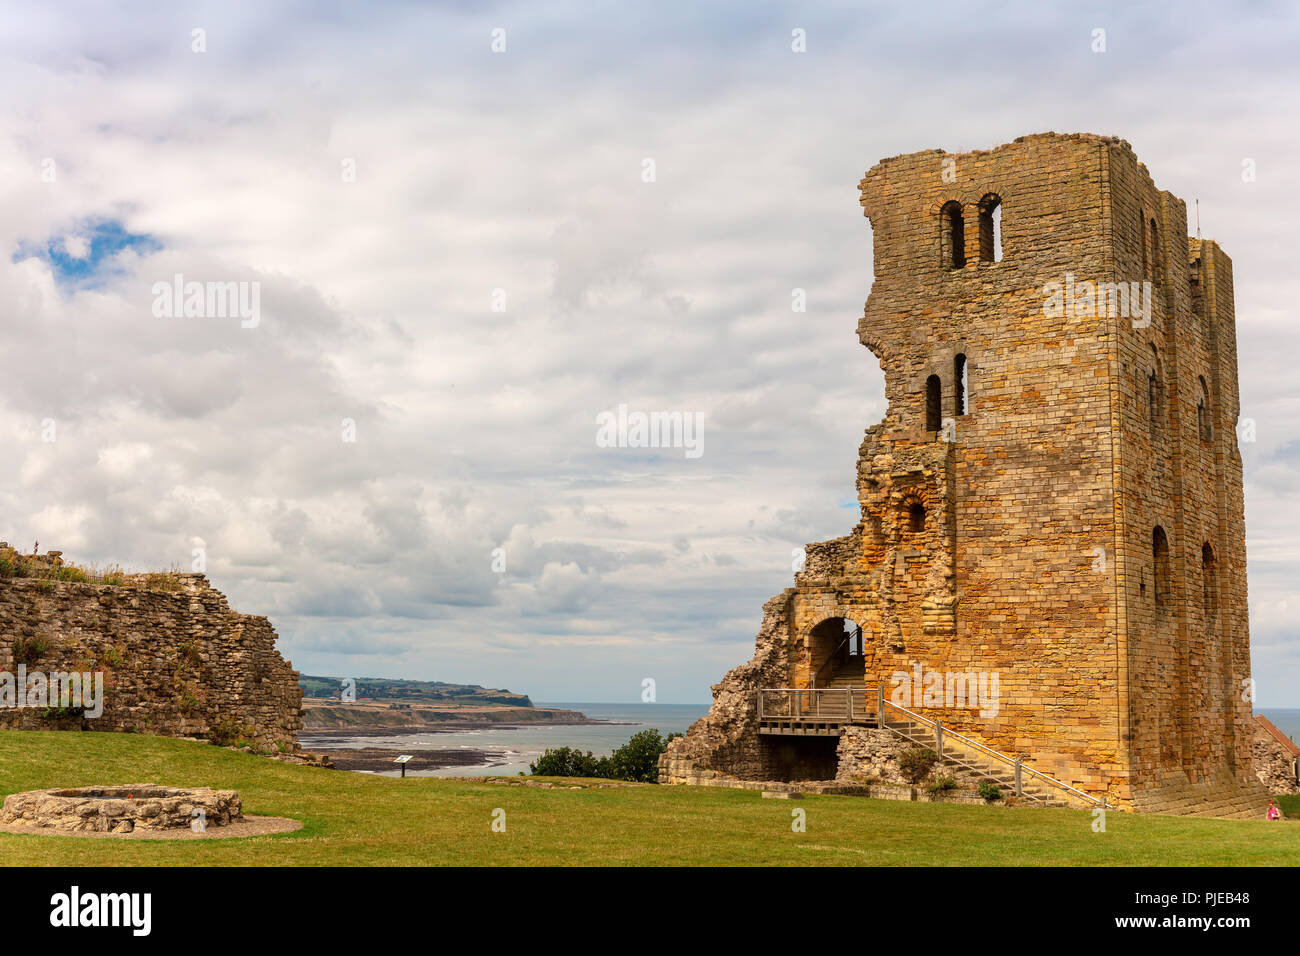 Dramatic cliff side landscape with Scarborough Castle in North Yorkshire. Stock Photo